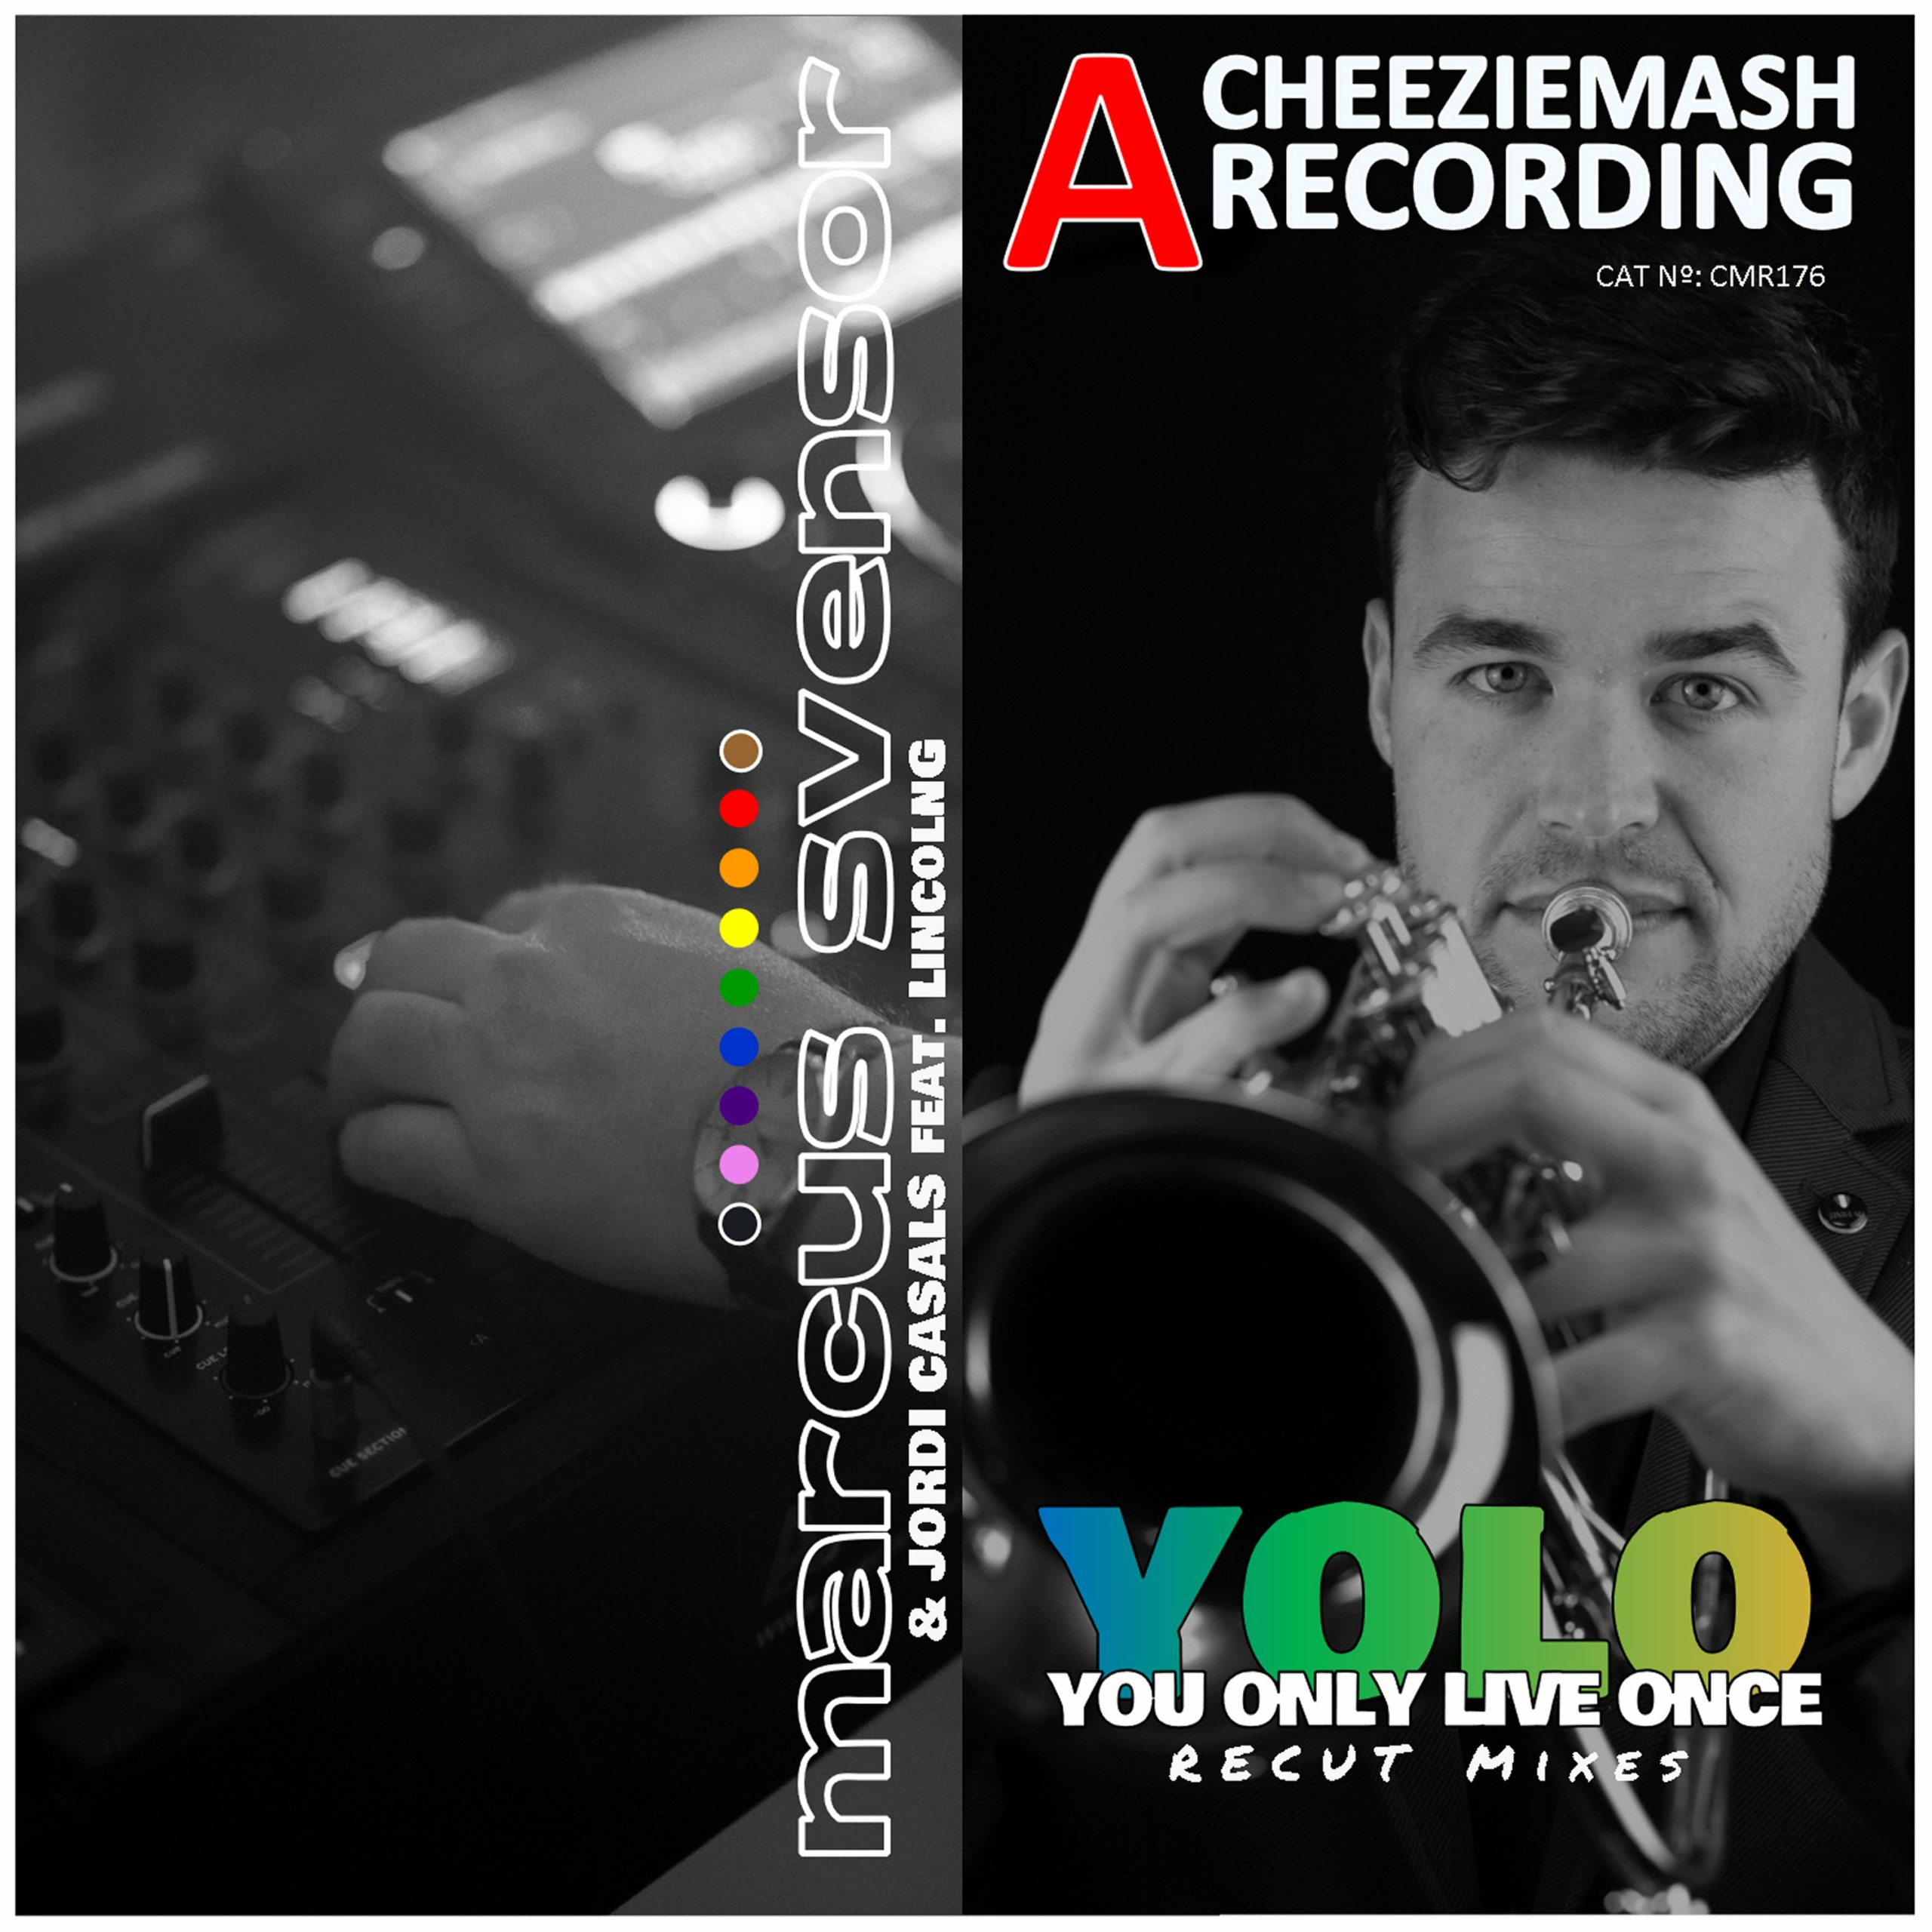 YOLO (You Only Live Once) Recut Mixes